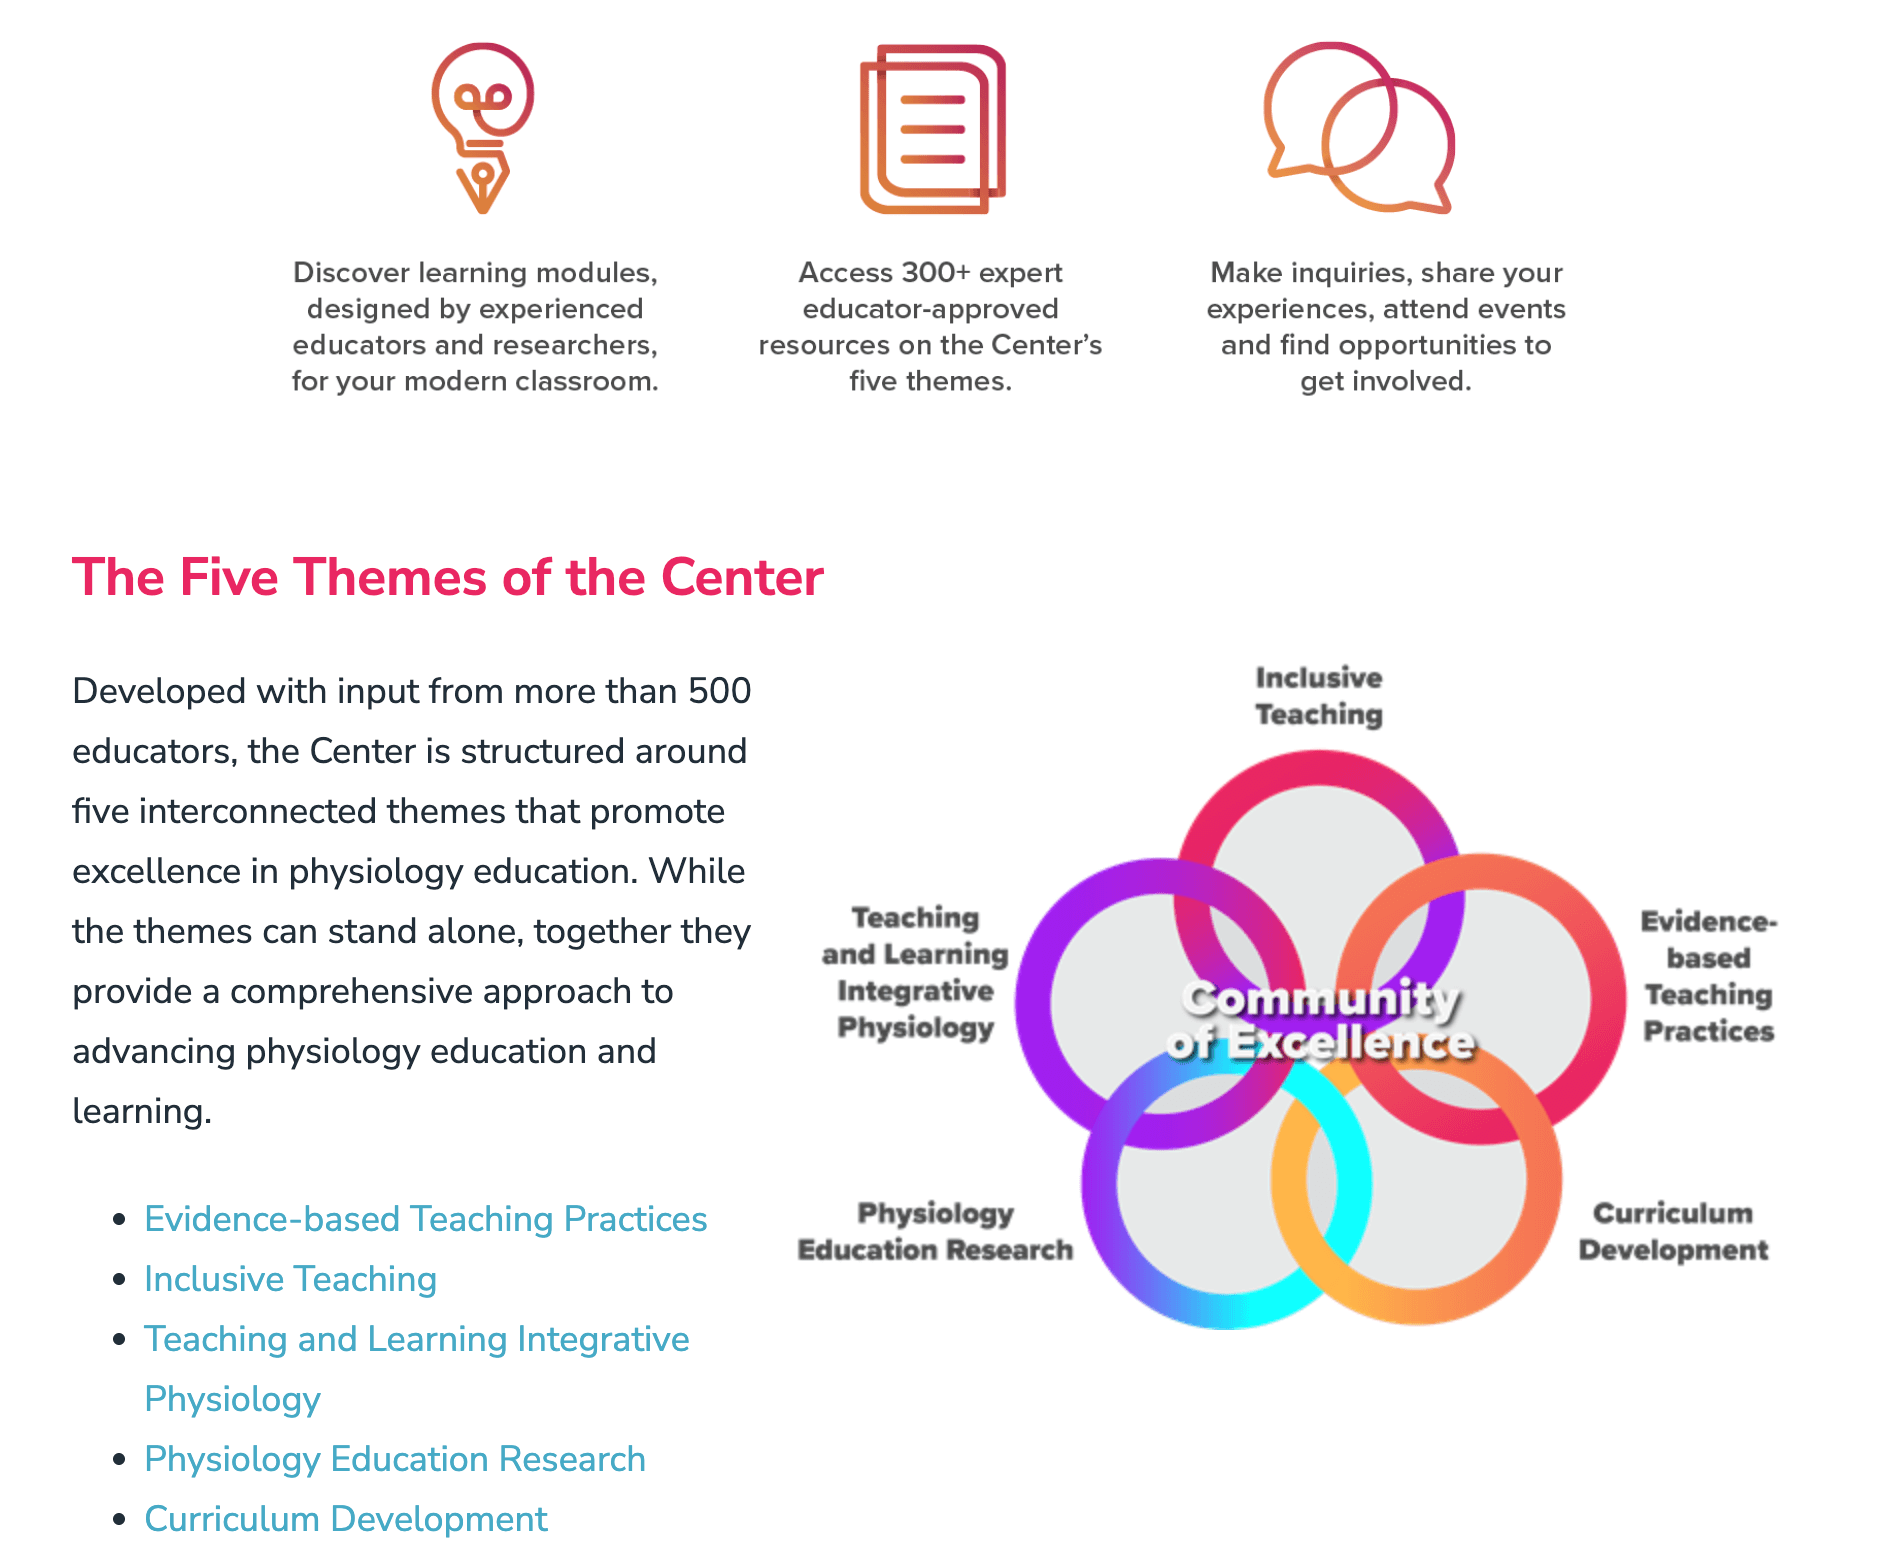 A screenshot of the home page of the Center for Physiology Education, showing the five themes of the Center: Evidence-based Teaching Practices, Inclusive Teaching, Teaching and Learning Integrative Physiology, Physiology Education Research, and Curriculum Development. There is a graphic showing each of these themes as a circle, with the five circles interlinking to form a "Community of Excellence". At the top of the image, there is a graphic of a lightbulb, accompanied by the text, "Discover learning modules, designed by experienced educators and researchers, for your modern classroom"; a graphic of stacked pages, accompanied by the text, "Access 300+ expert educator-approved resources on the Center's five themes"; and a graphic of interlocked speech bubbles, accompanied by the text, "Make inquiries, share your experiences, attend events and find opportunities to get involved".